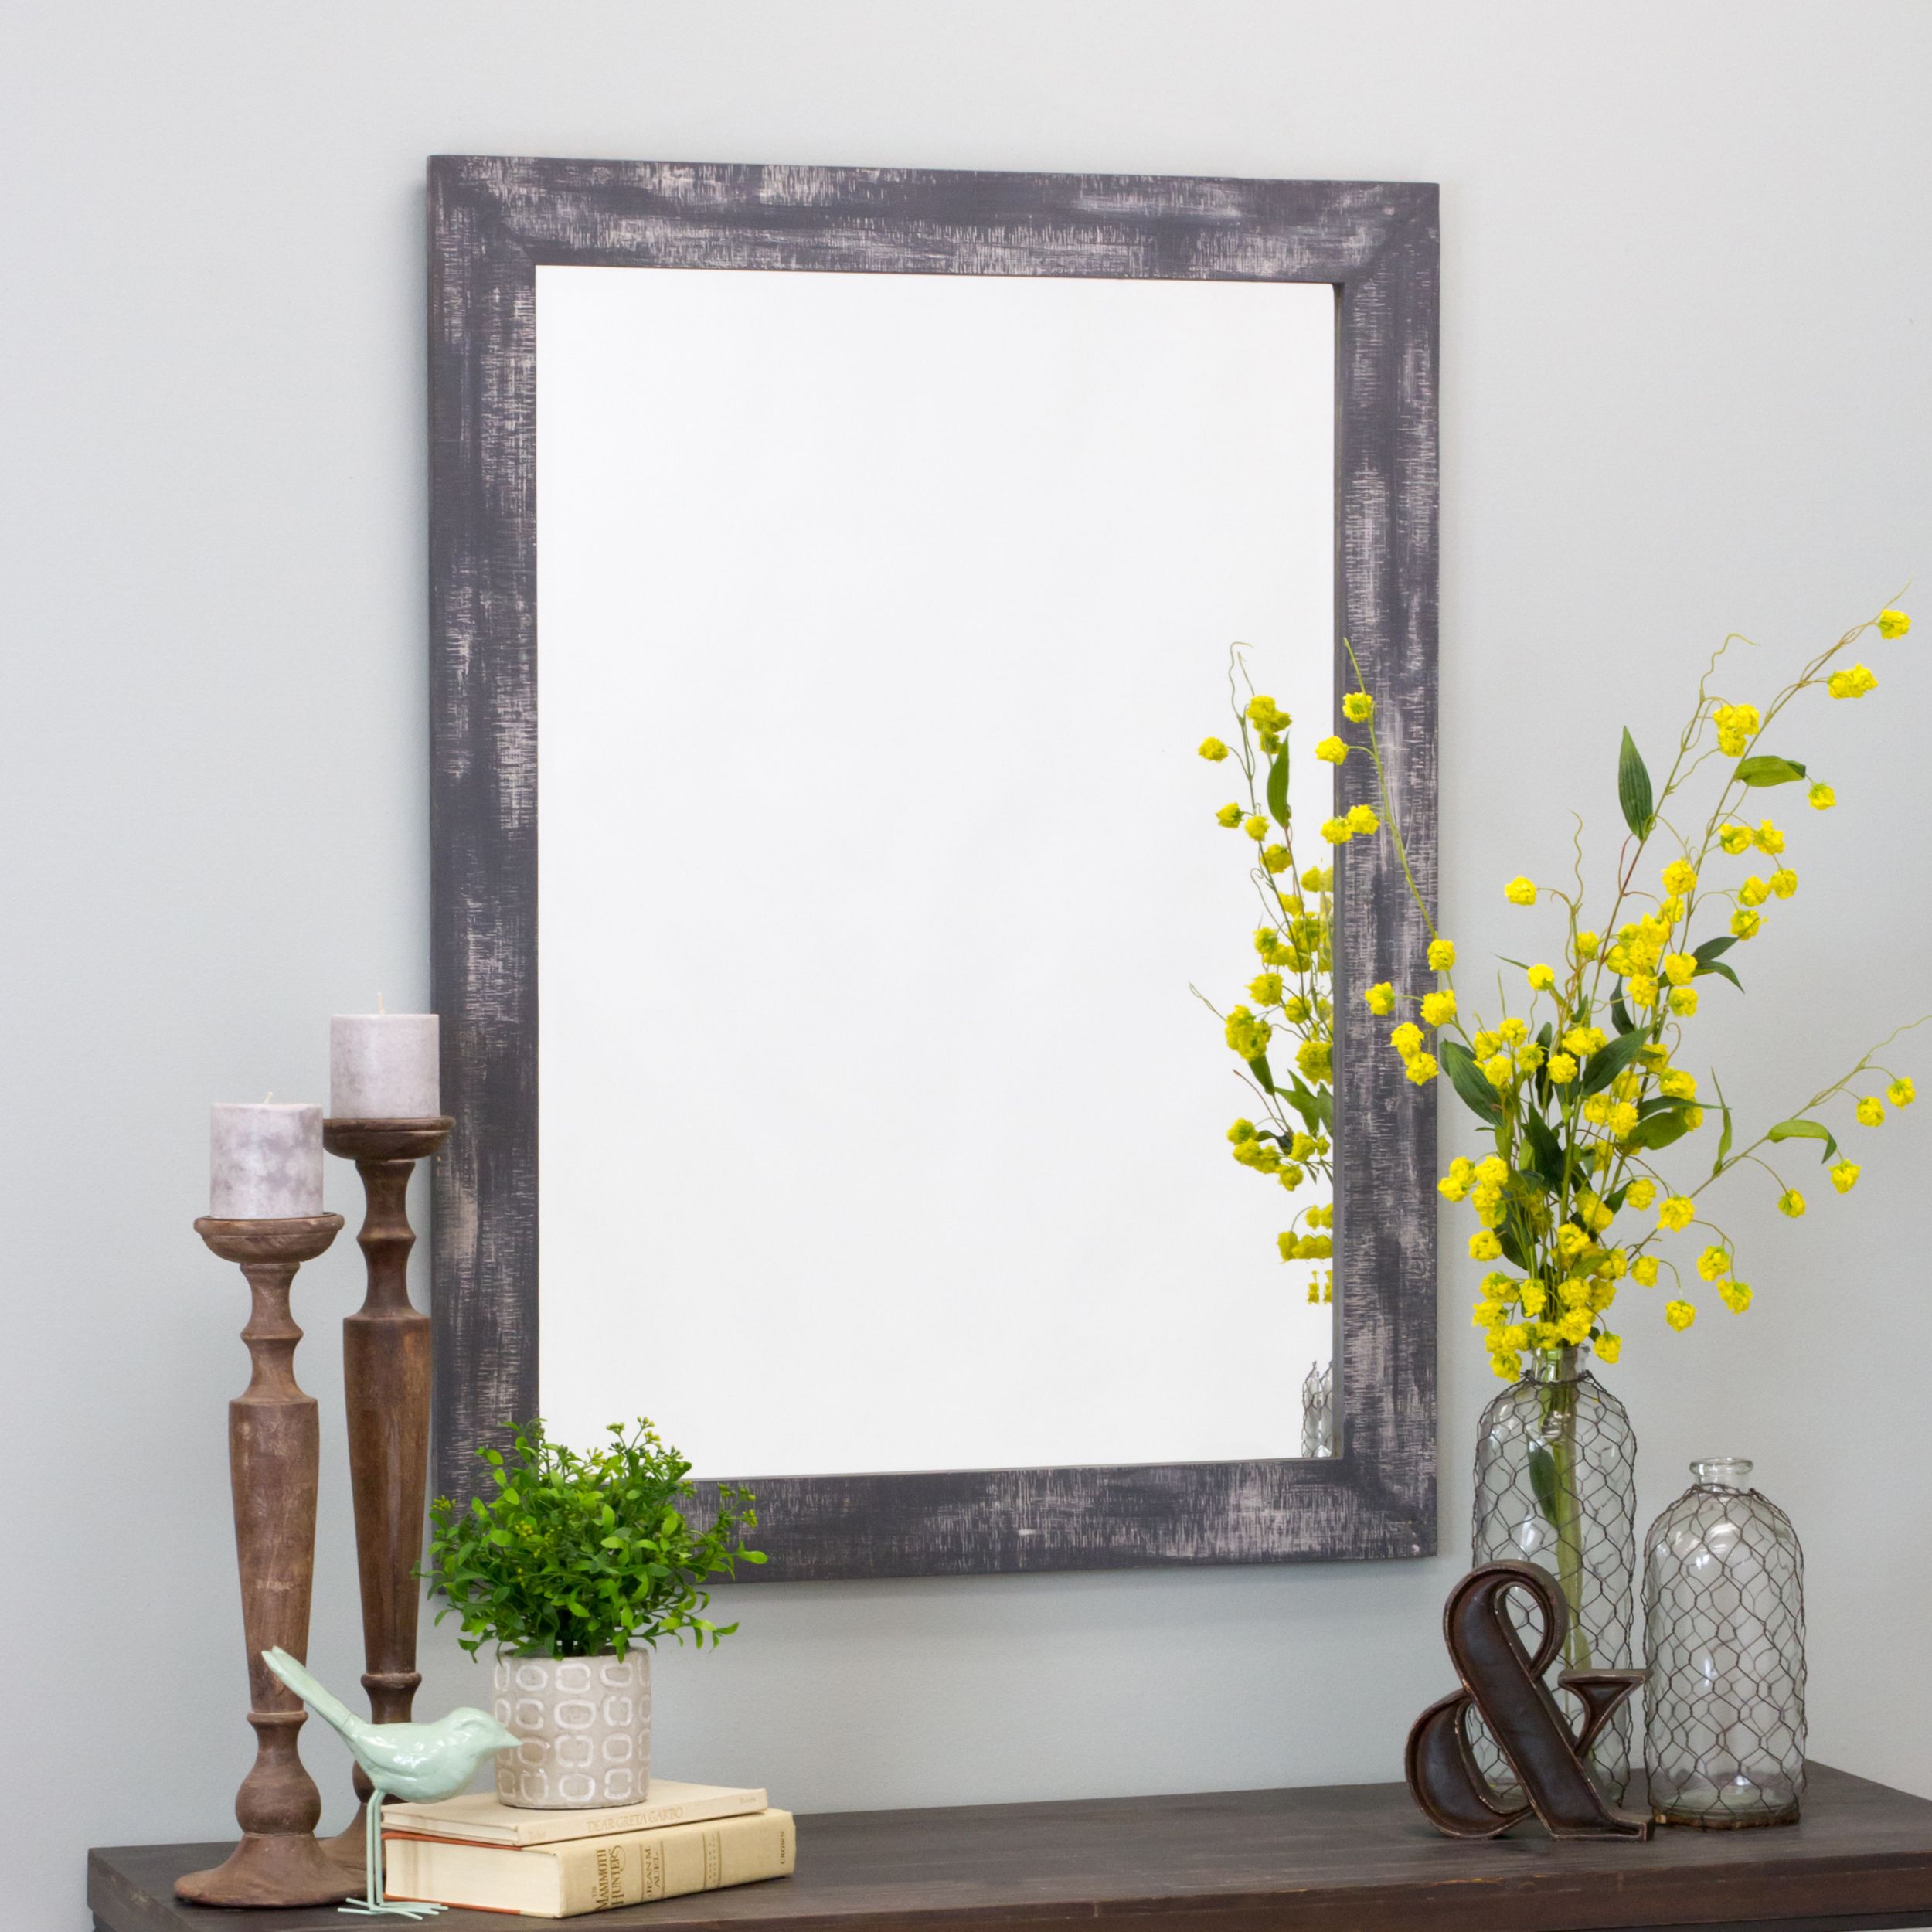 Morris Rustic Wood Large Wall Mirror – Gray 40" X 30"aspire With Gray Wall Mirrors (View 6 of 15)